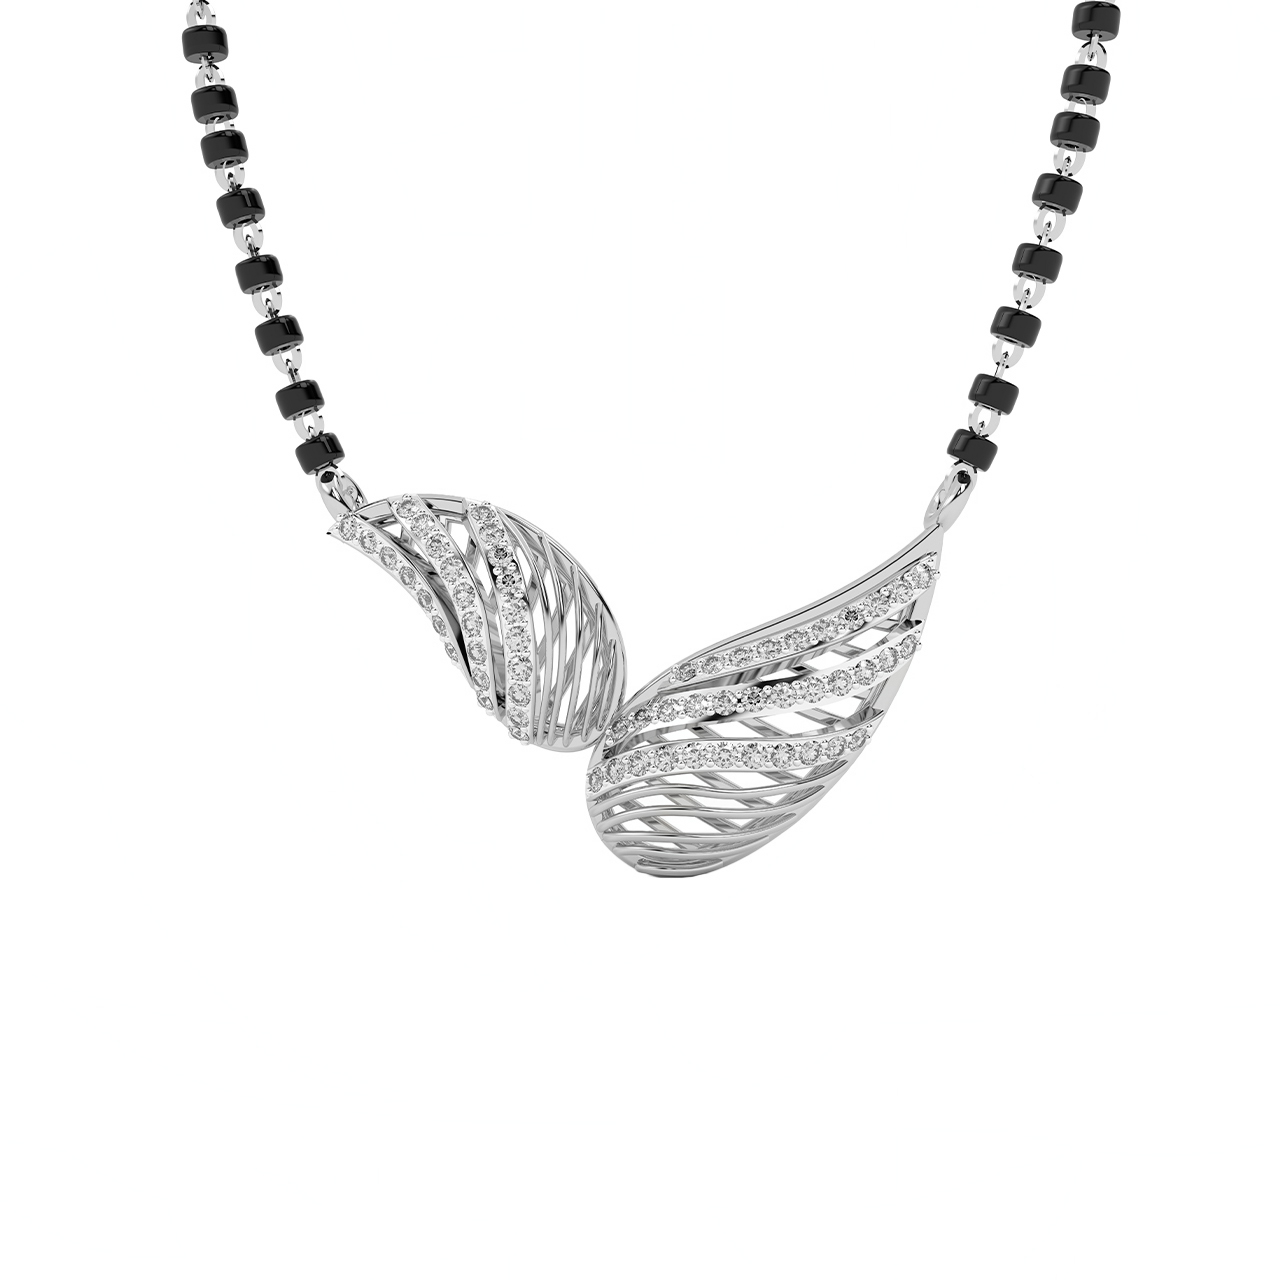 Shell Design Diamond Mangalsutra With Chain